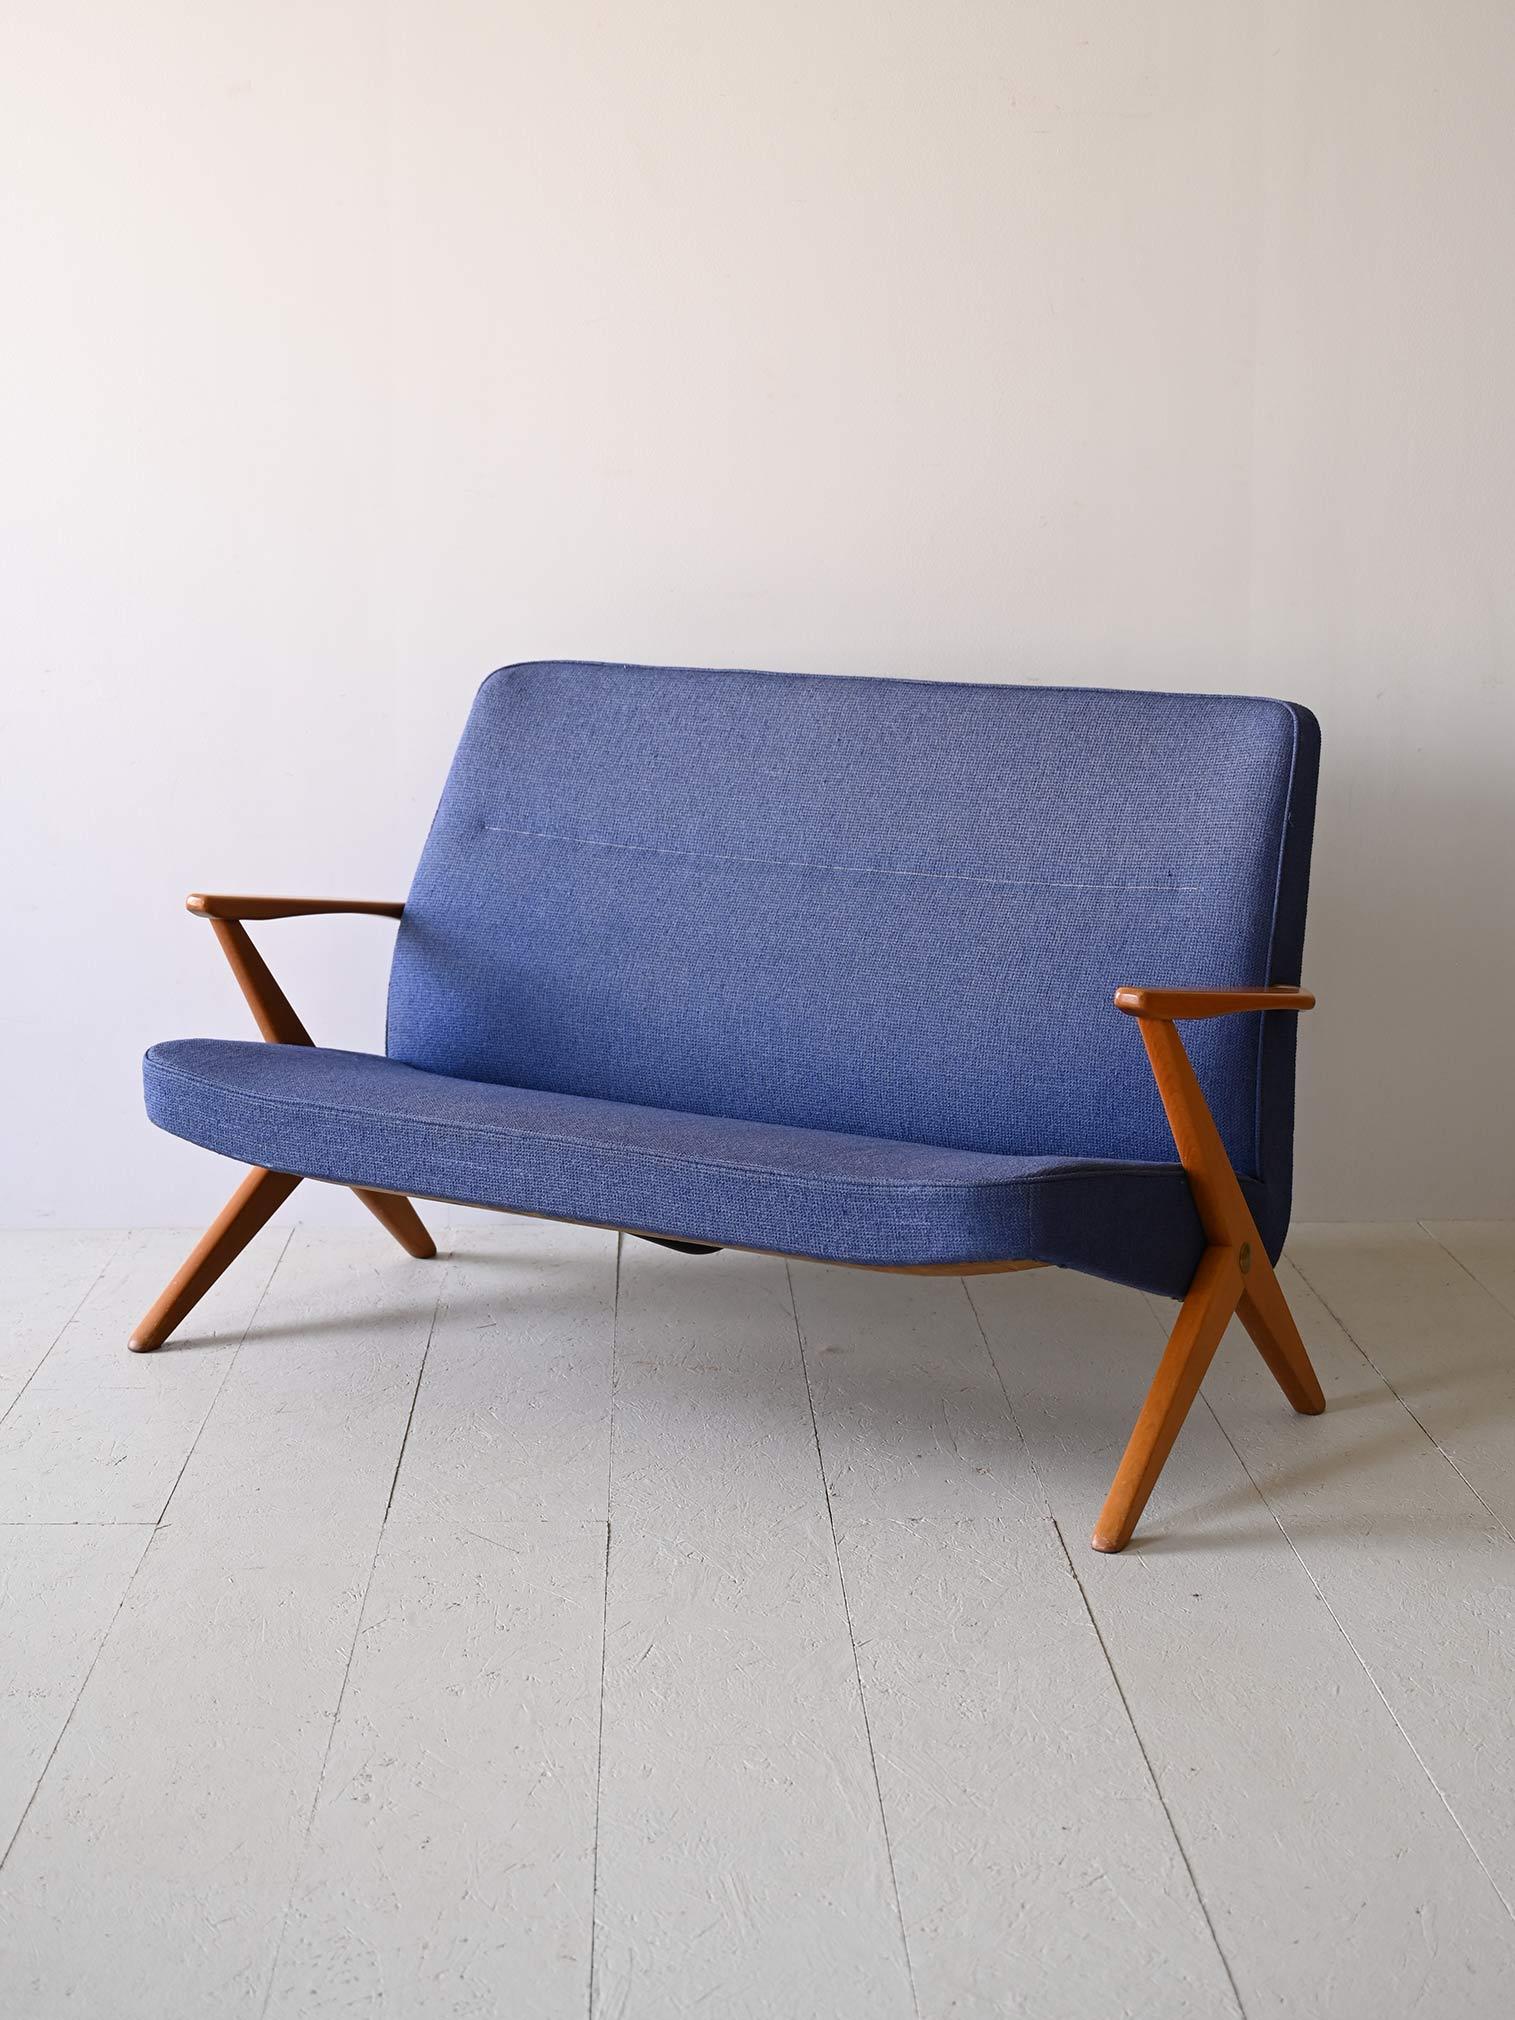 Nordic sofa in original vintage blue fabric.

Designed by Bengt Ruda for NK in the 1950s, it was manufactured in Sweden.
X-shaped legs offer stability and modernity, while rounded wooden arms add a touch of warmth and sophistication.

Its minimal